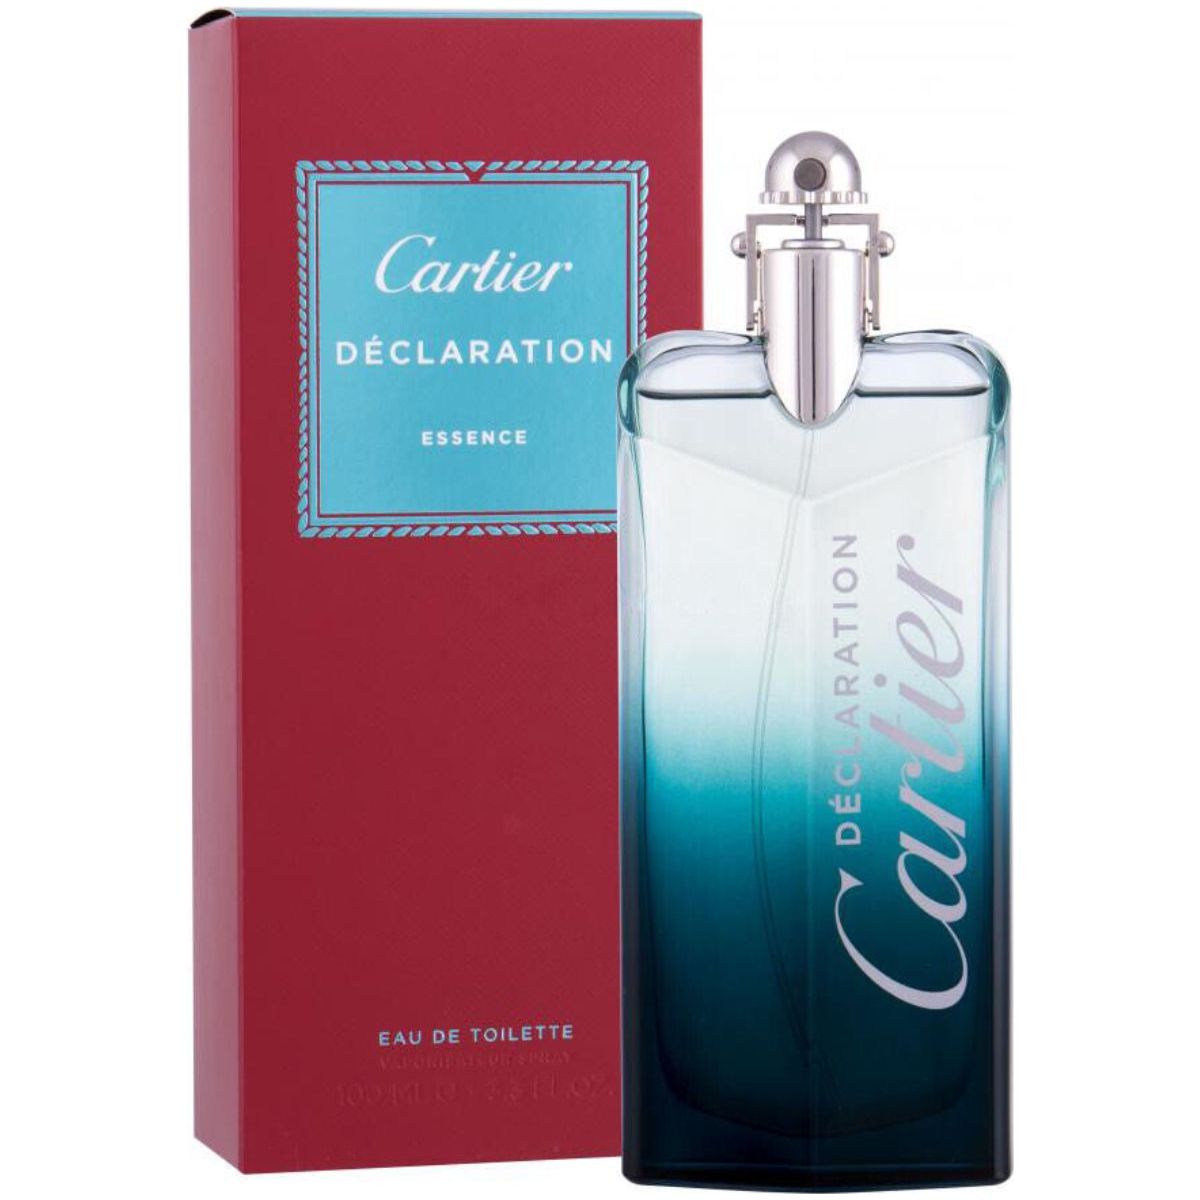 Declaration Essence by Cartier cologne for men EDT 3.3 / 3.4 oz New in